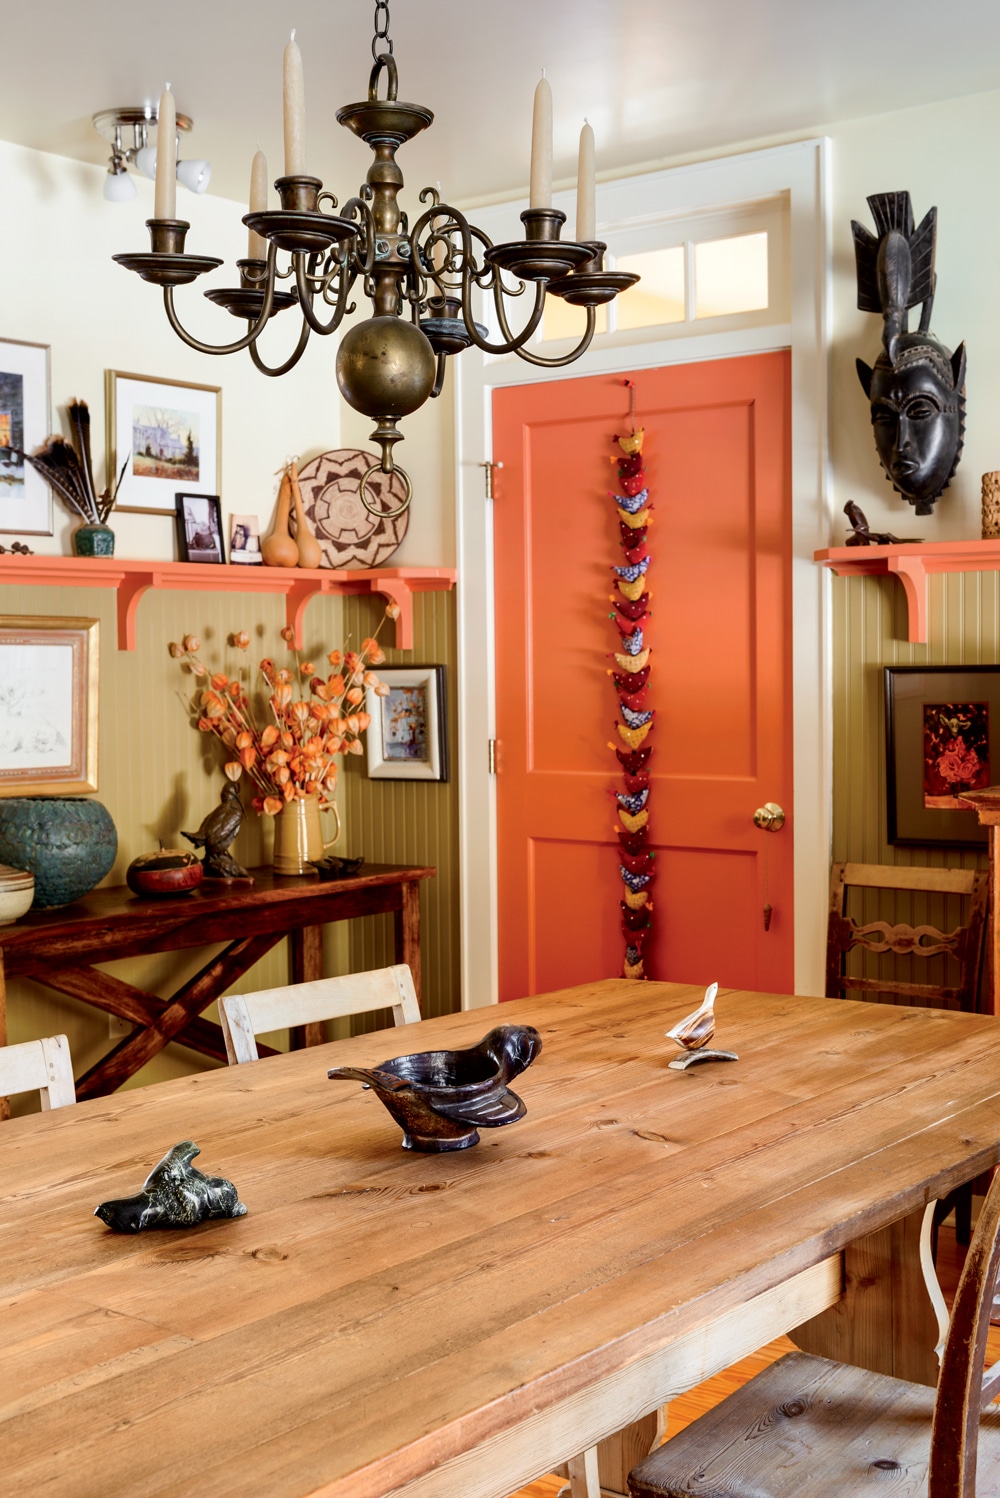 The dining room’s high beadboard wainscoting strikes a traditional note amid exotic artifacts.